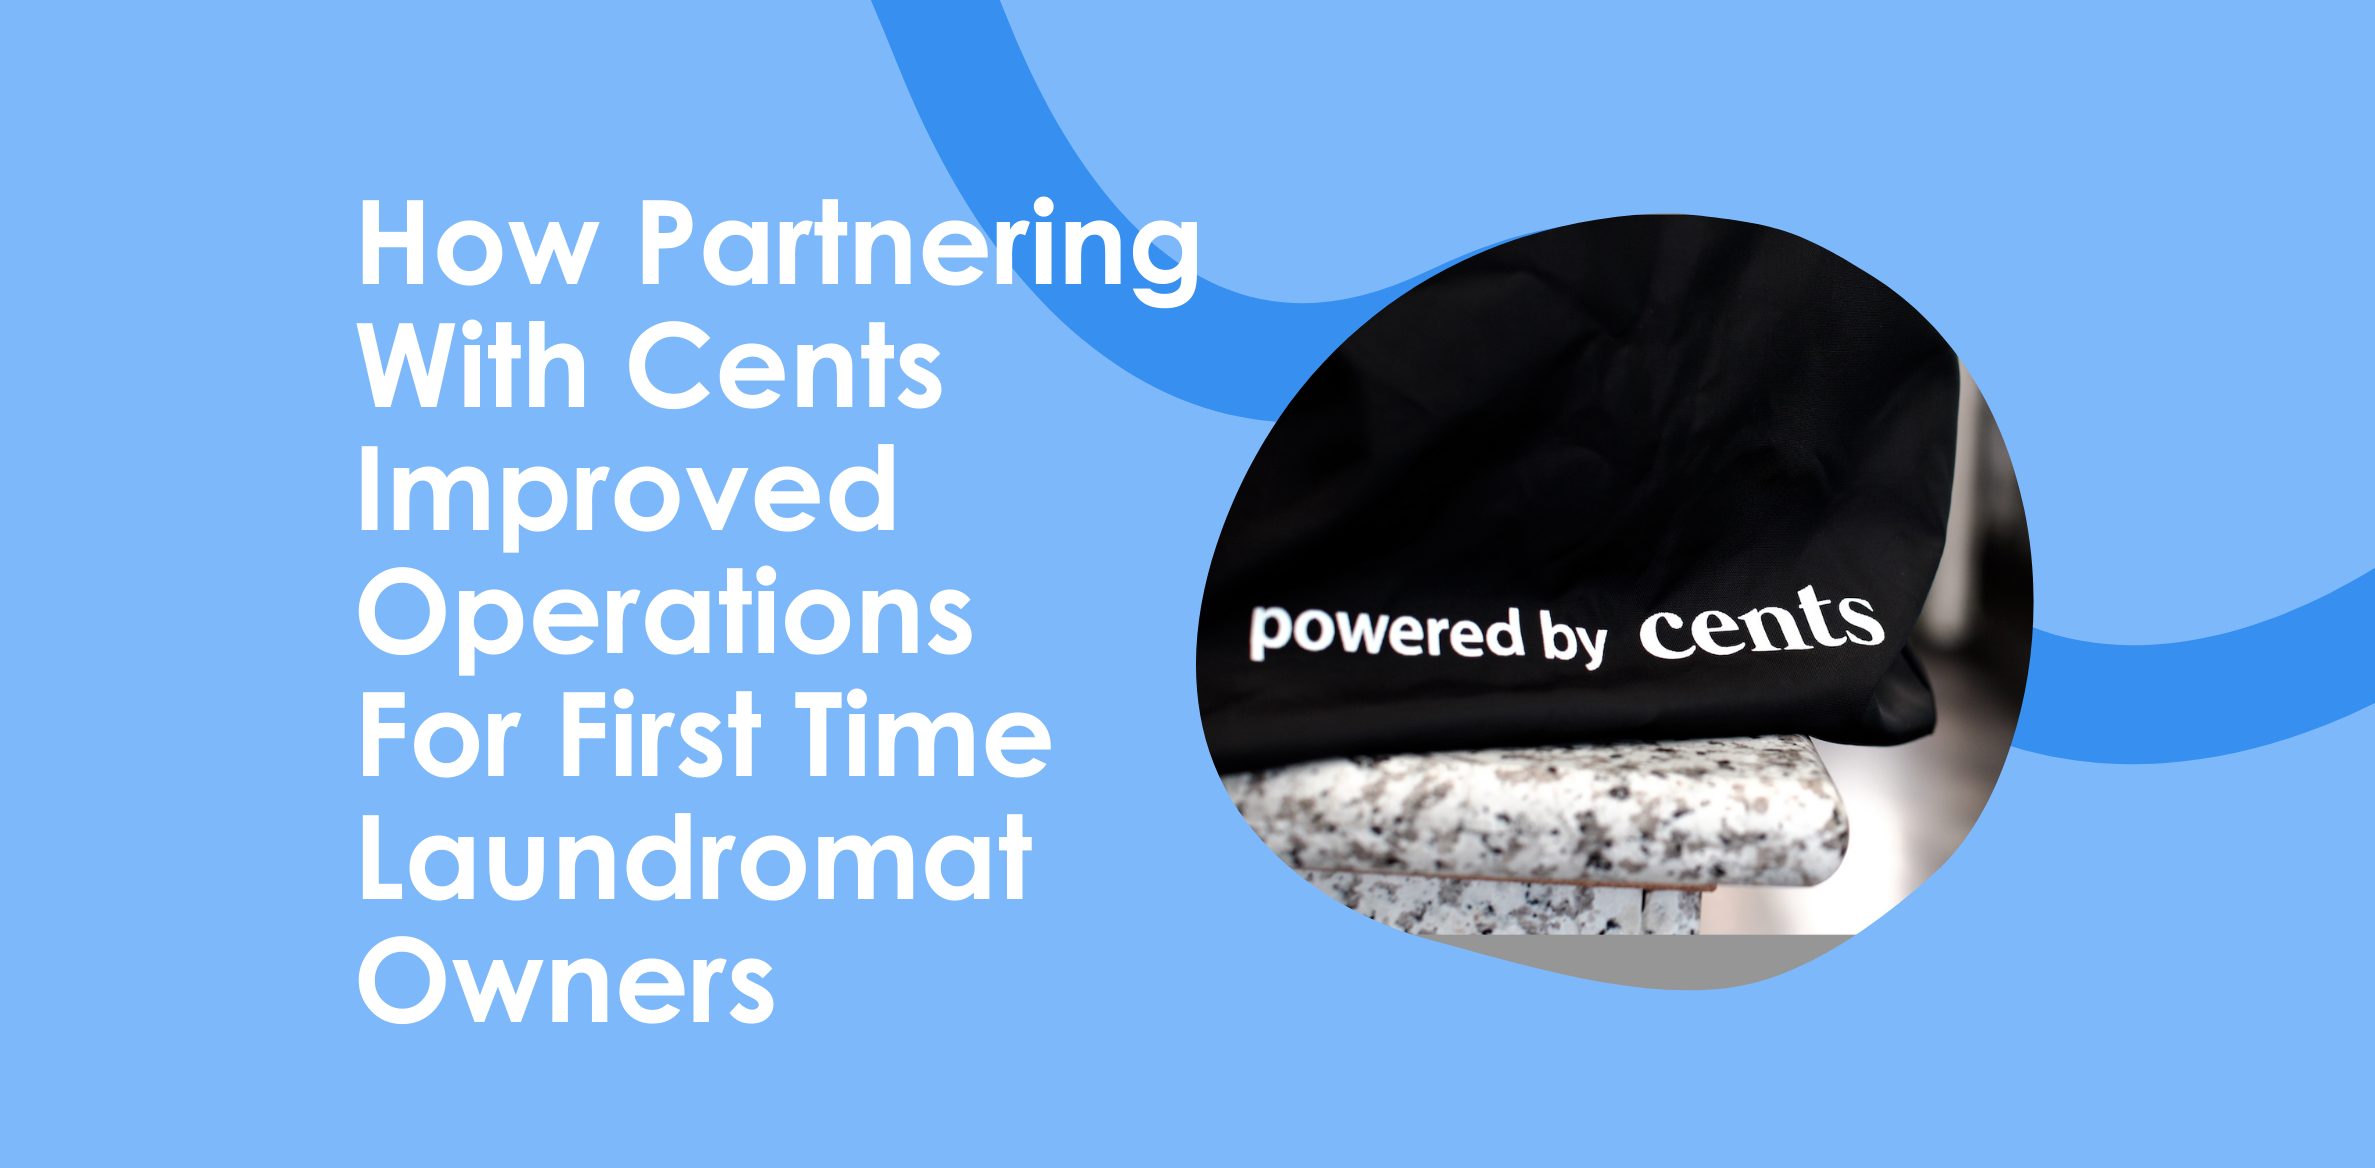 How Partnering With Cents Improved Operations For First Time Laundromat Owners